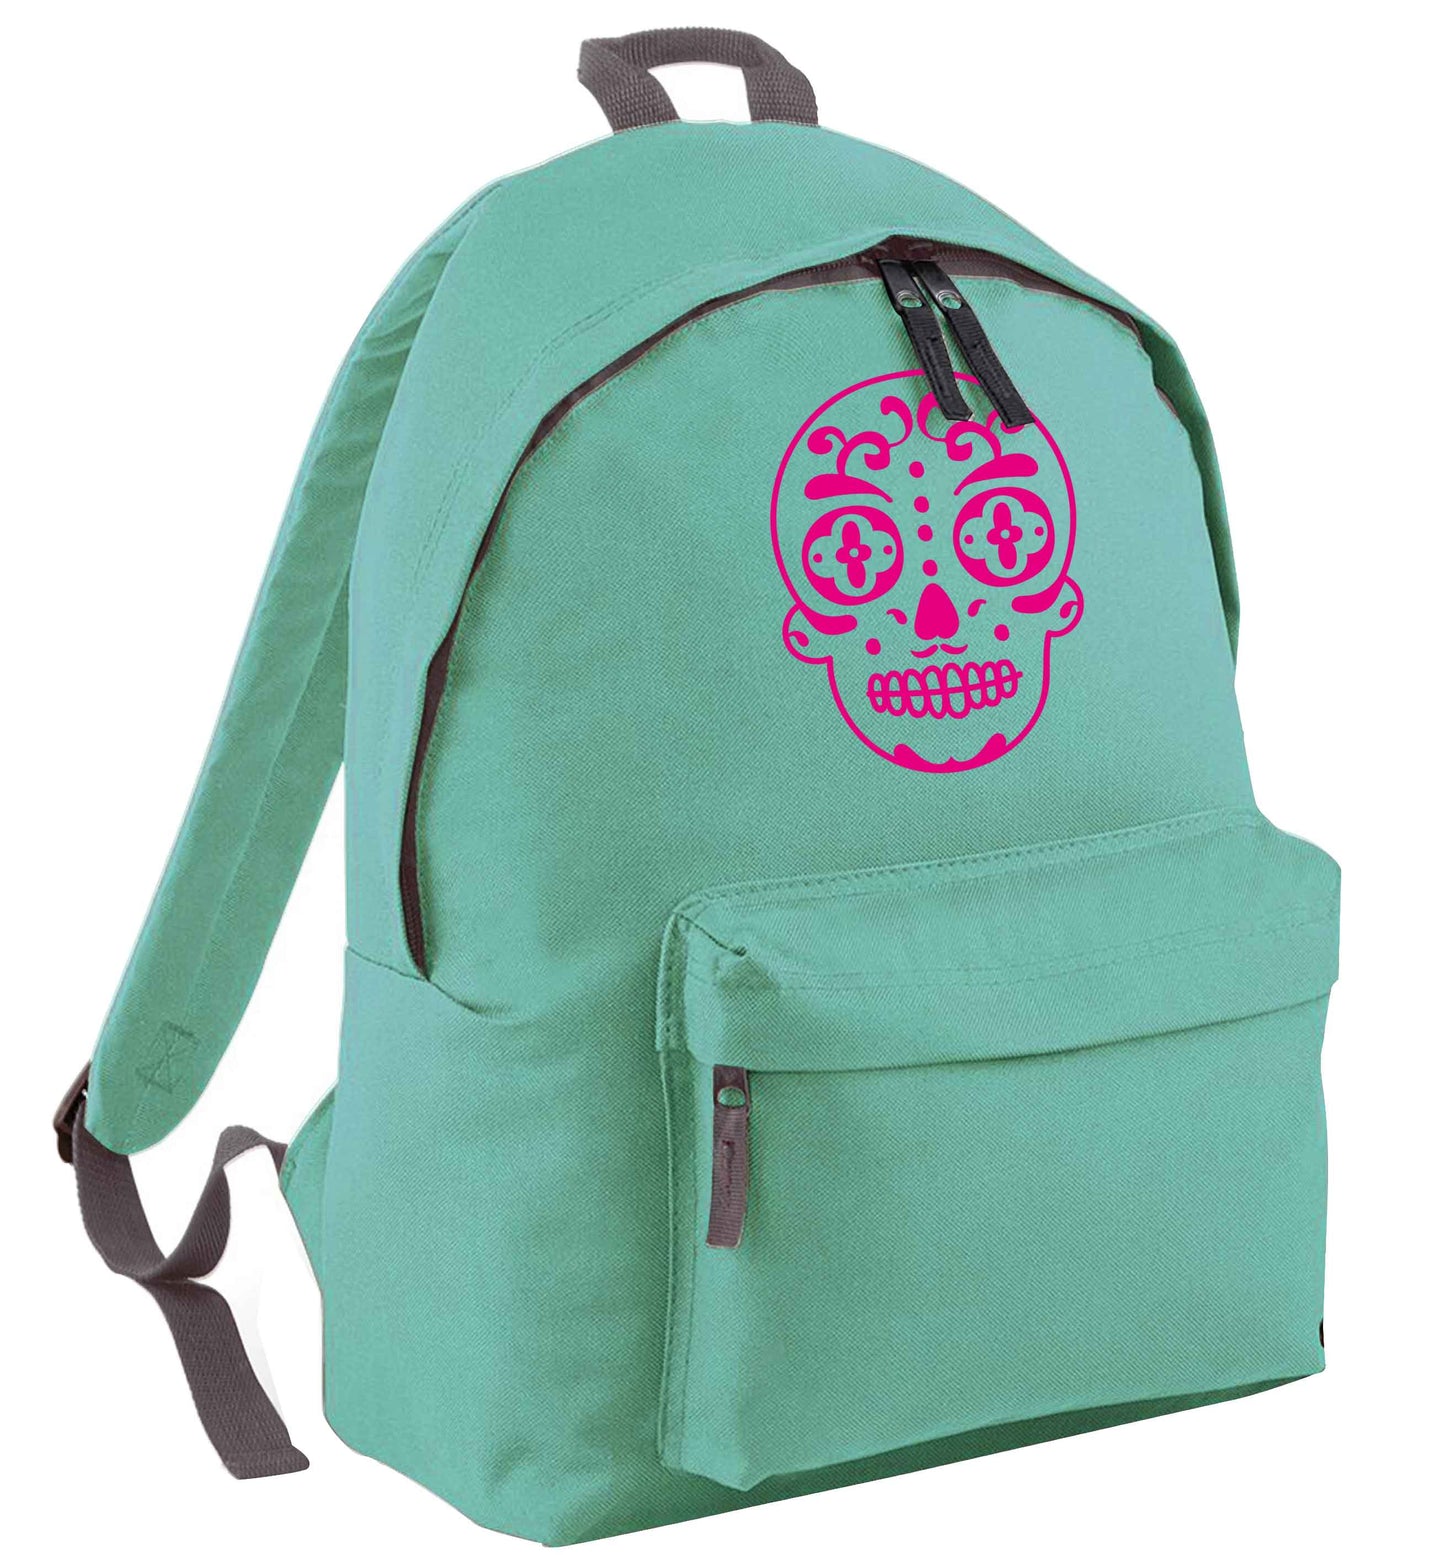 Neon pink sugar skull mint adults backpack